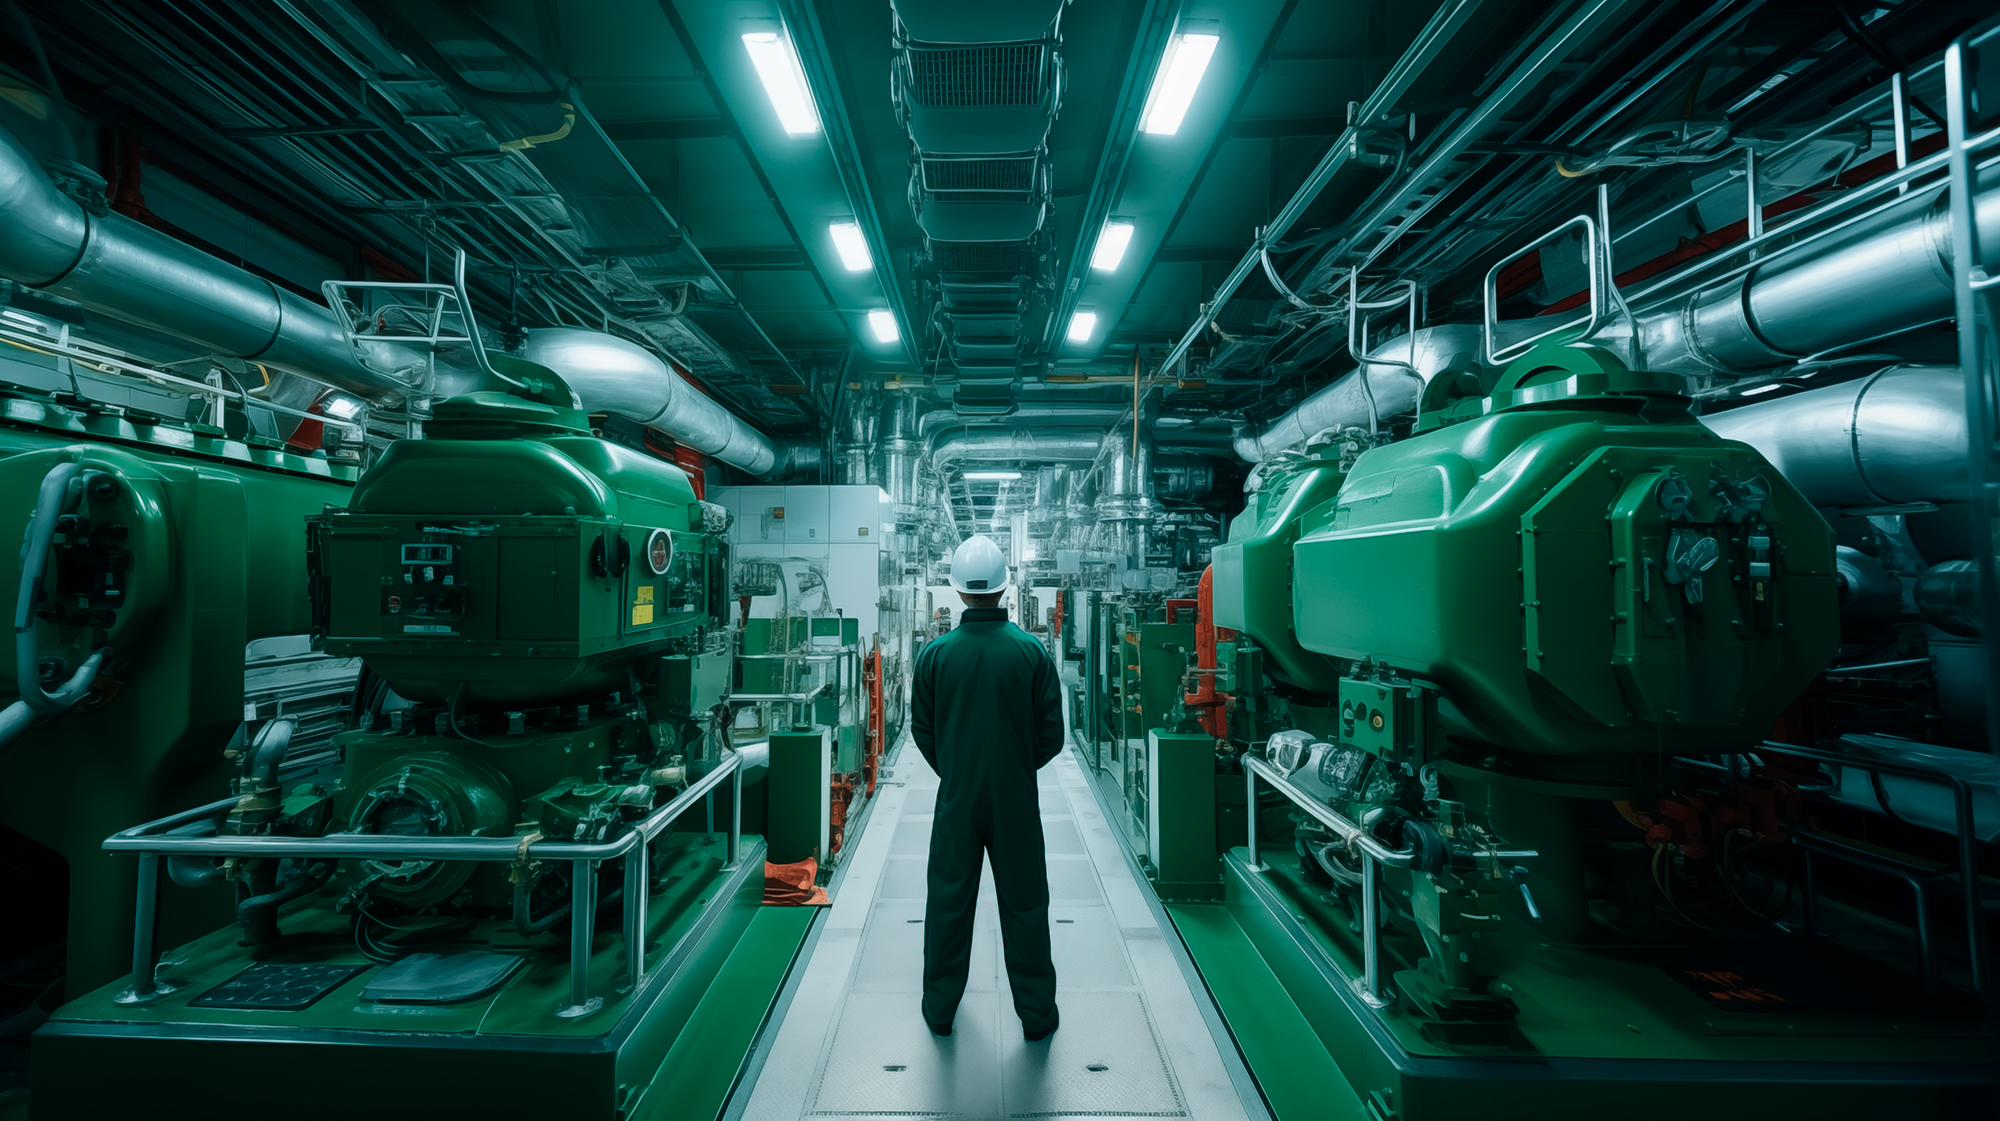 The image show a symmetrical engine room with a floor in the center, dark green coloured. A man with green clothes is standing on the floor and observing the equipment.